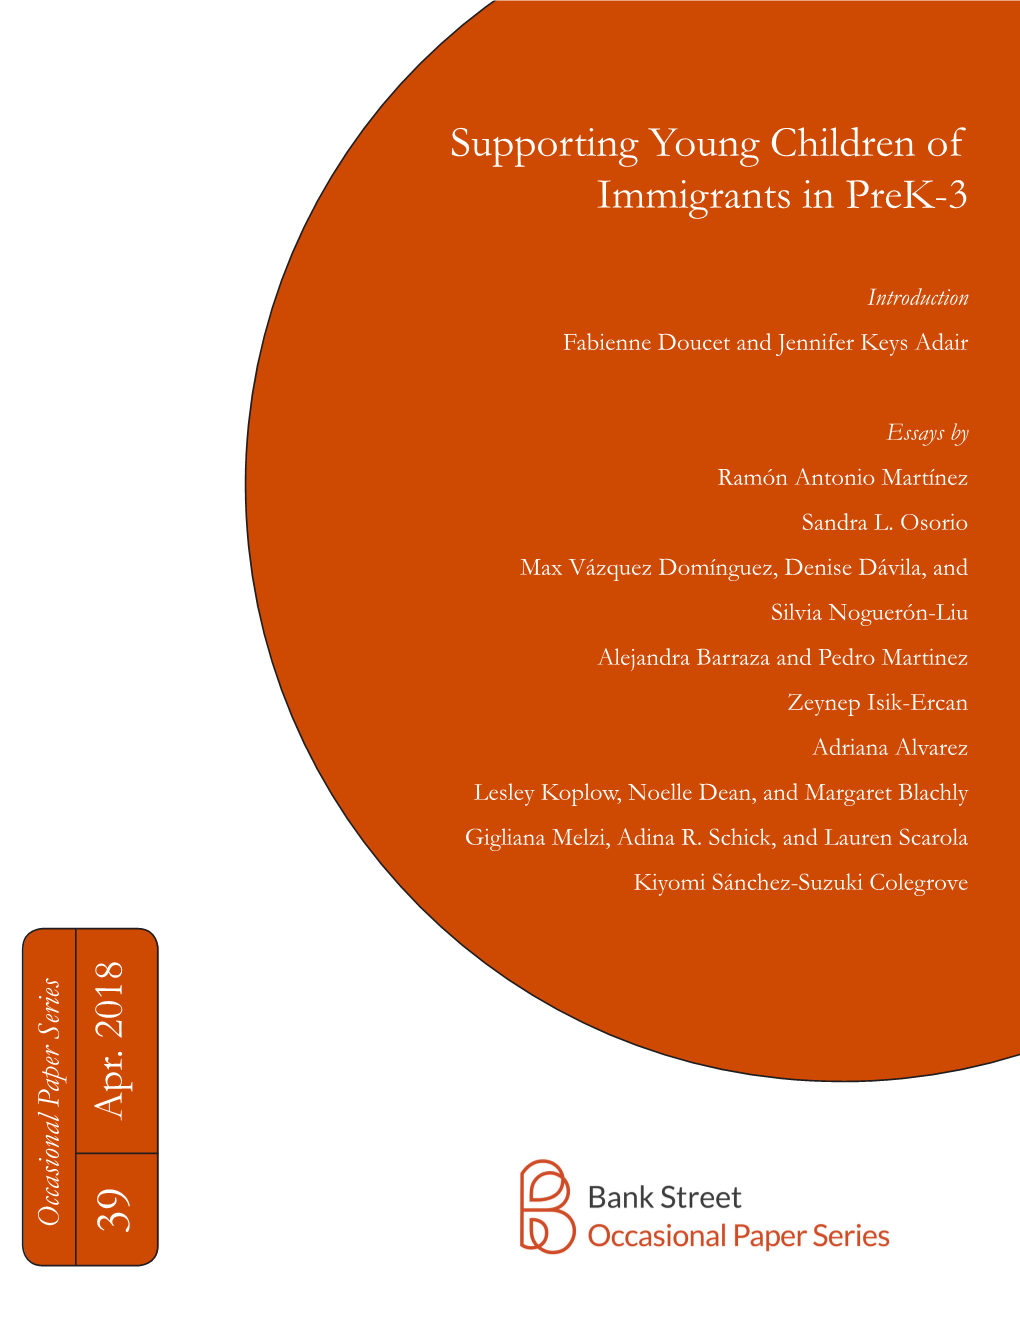 Supporting Young Children of Immigrants in Prek-3